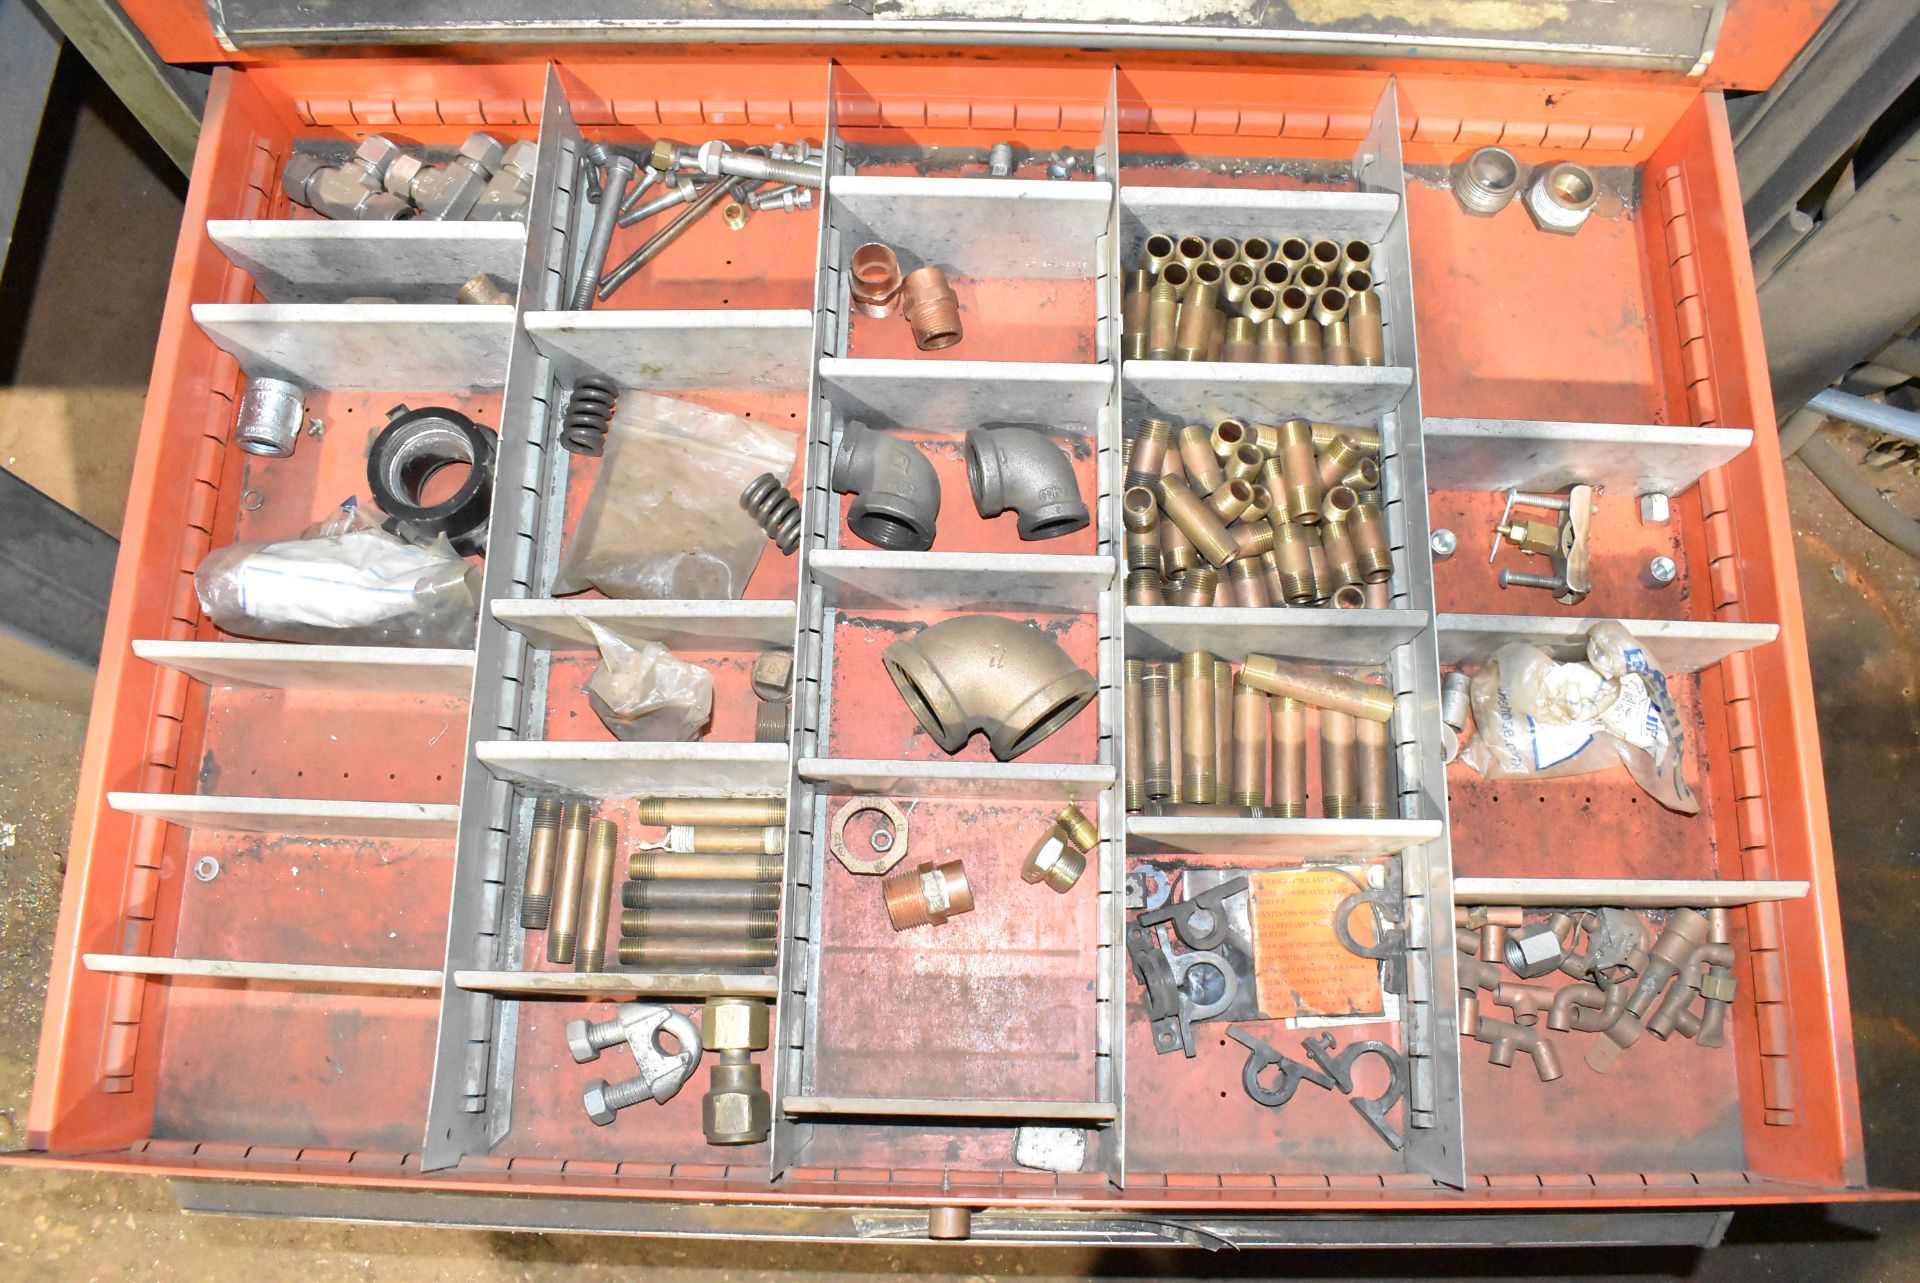 LOT/ CONTENTS OF TOOL CABINET - INCLUDING FITTINGS, FITTING CLAMPS, SPARE PARTS, TAPS & DIES, - Image 13 of 14